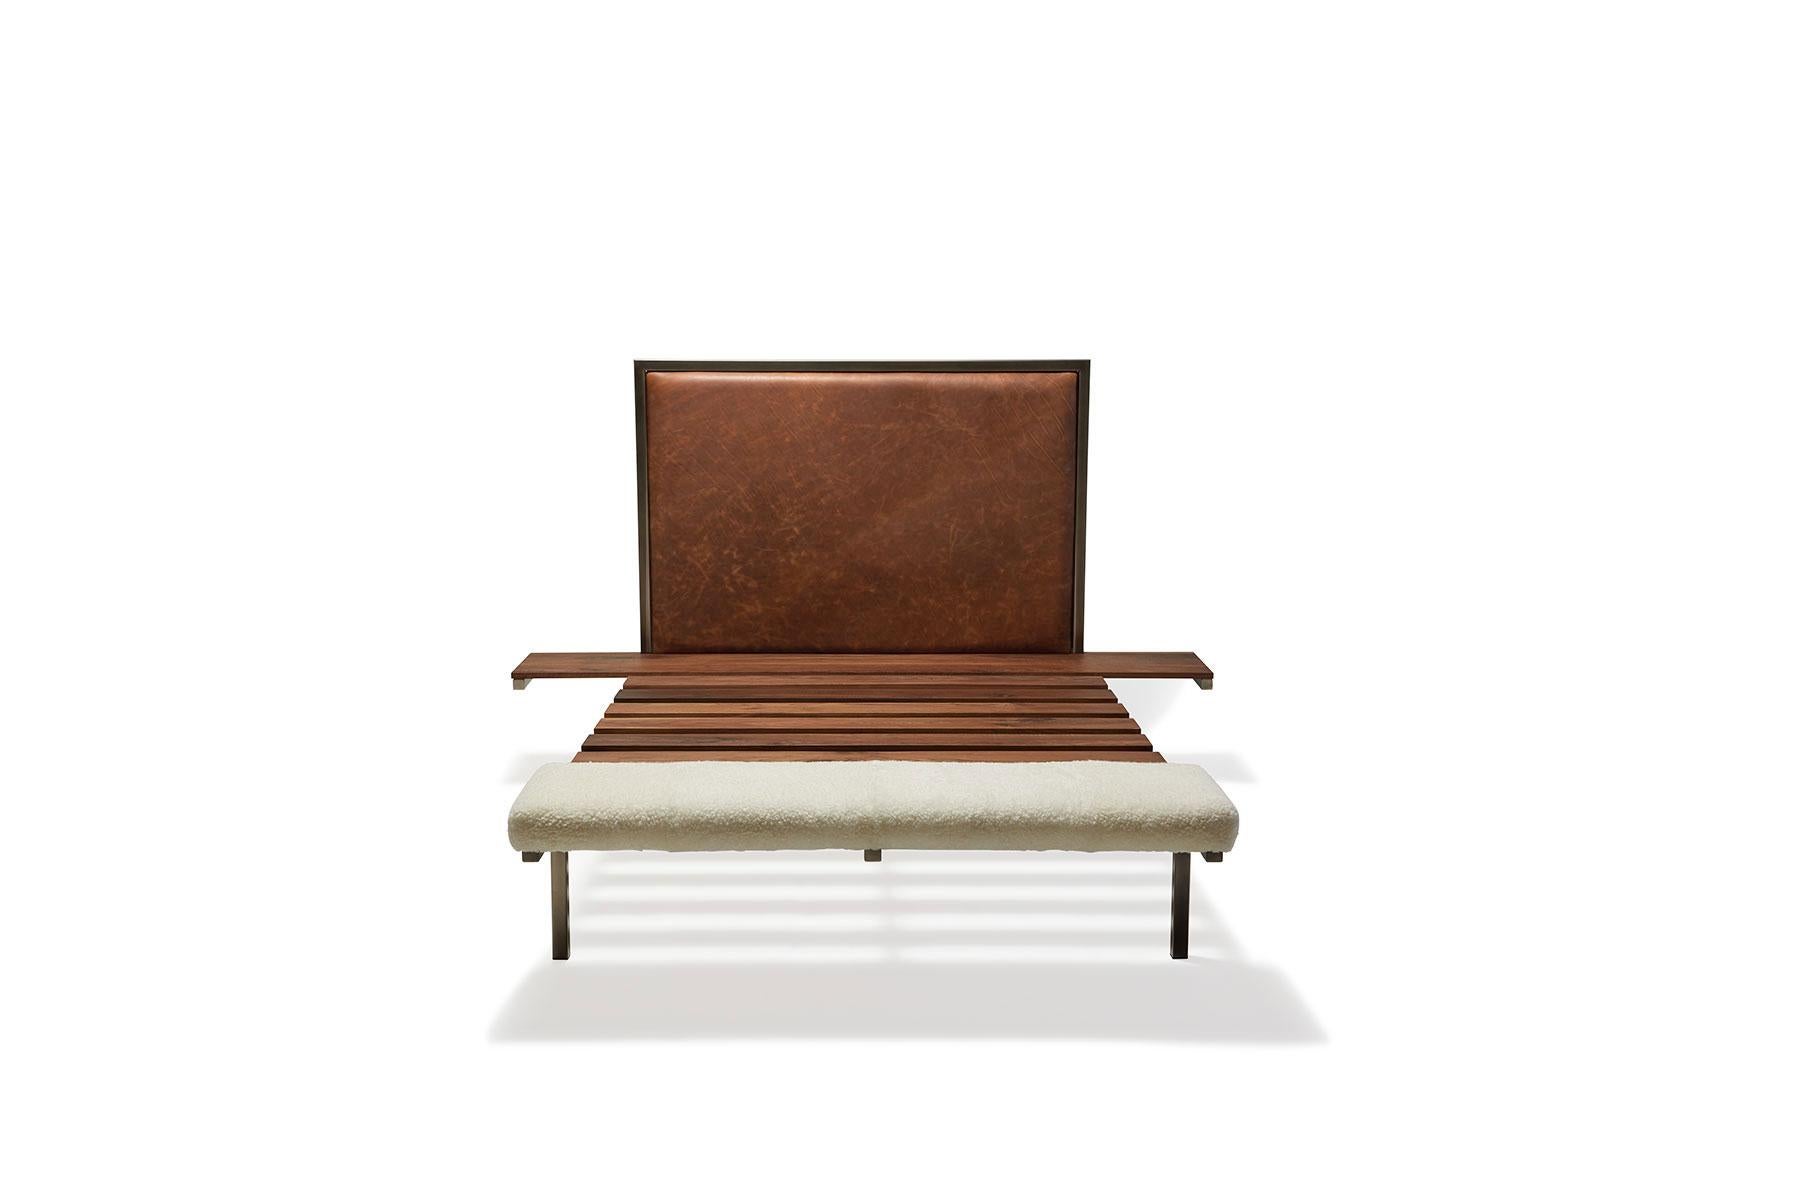 Rest with style in the Stephen Kenn Inheritance Bed. Streamlined and simple, the bed is designed serves three furnishing purposes with integrated side tables and a foot bench. 

Beginning with an antique nickel tubular steel frame, walnut wood